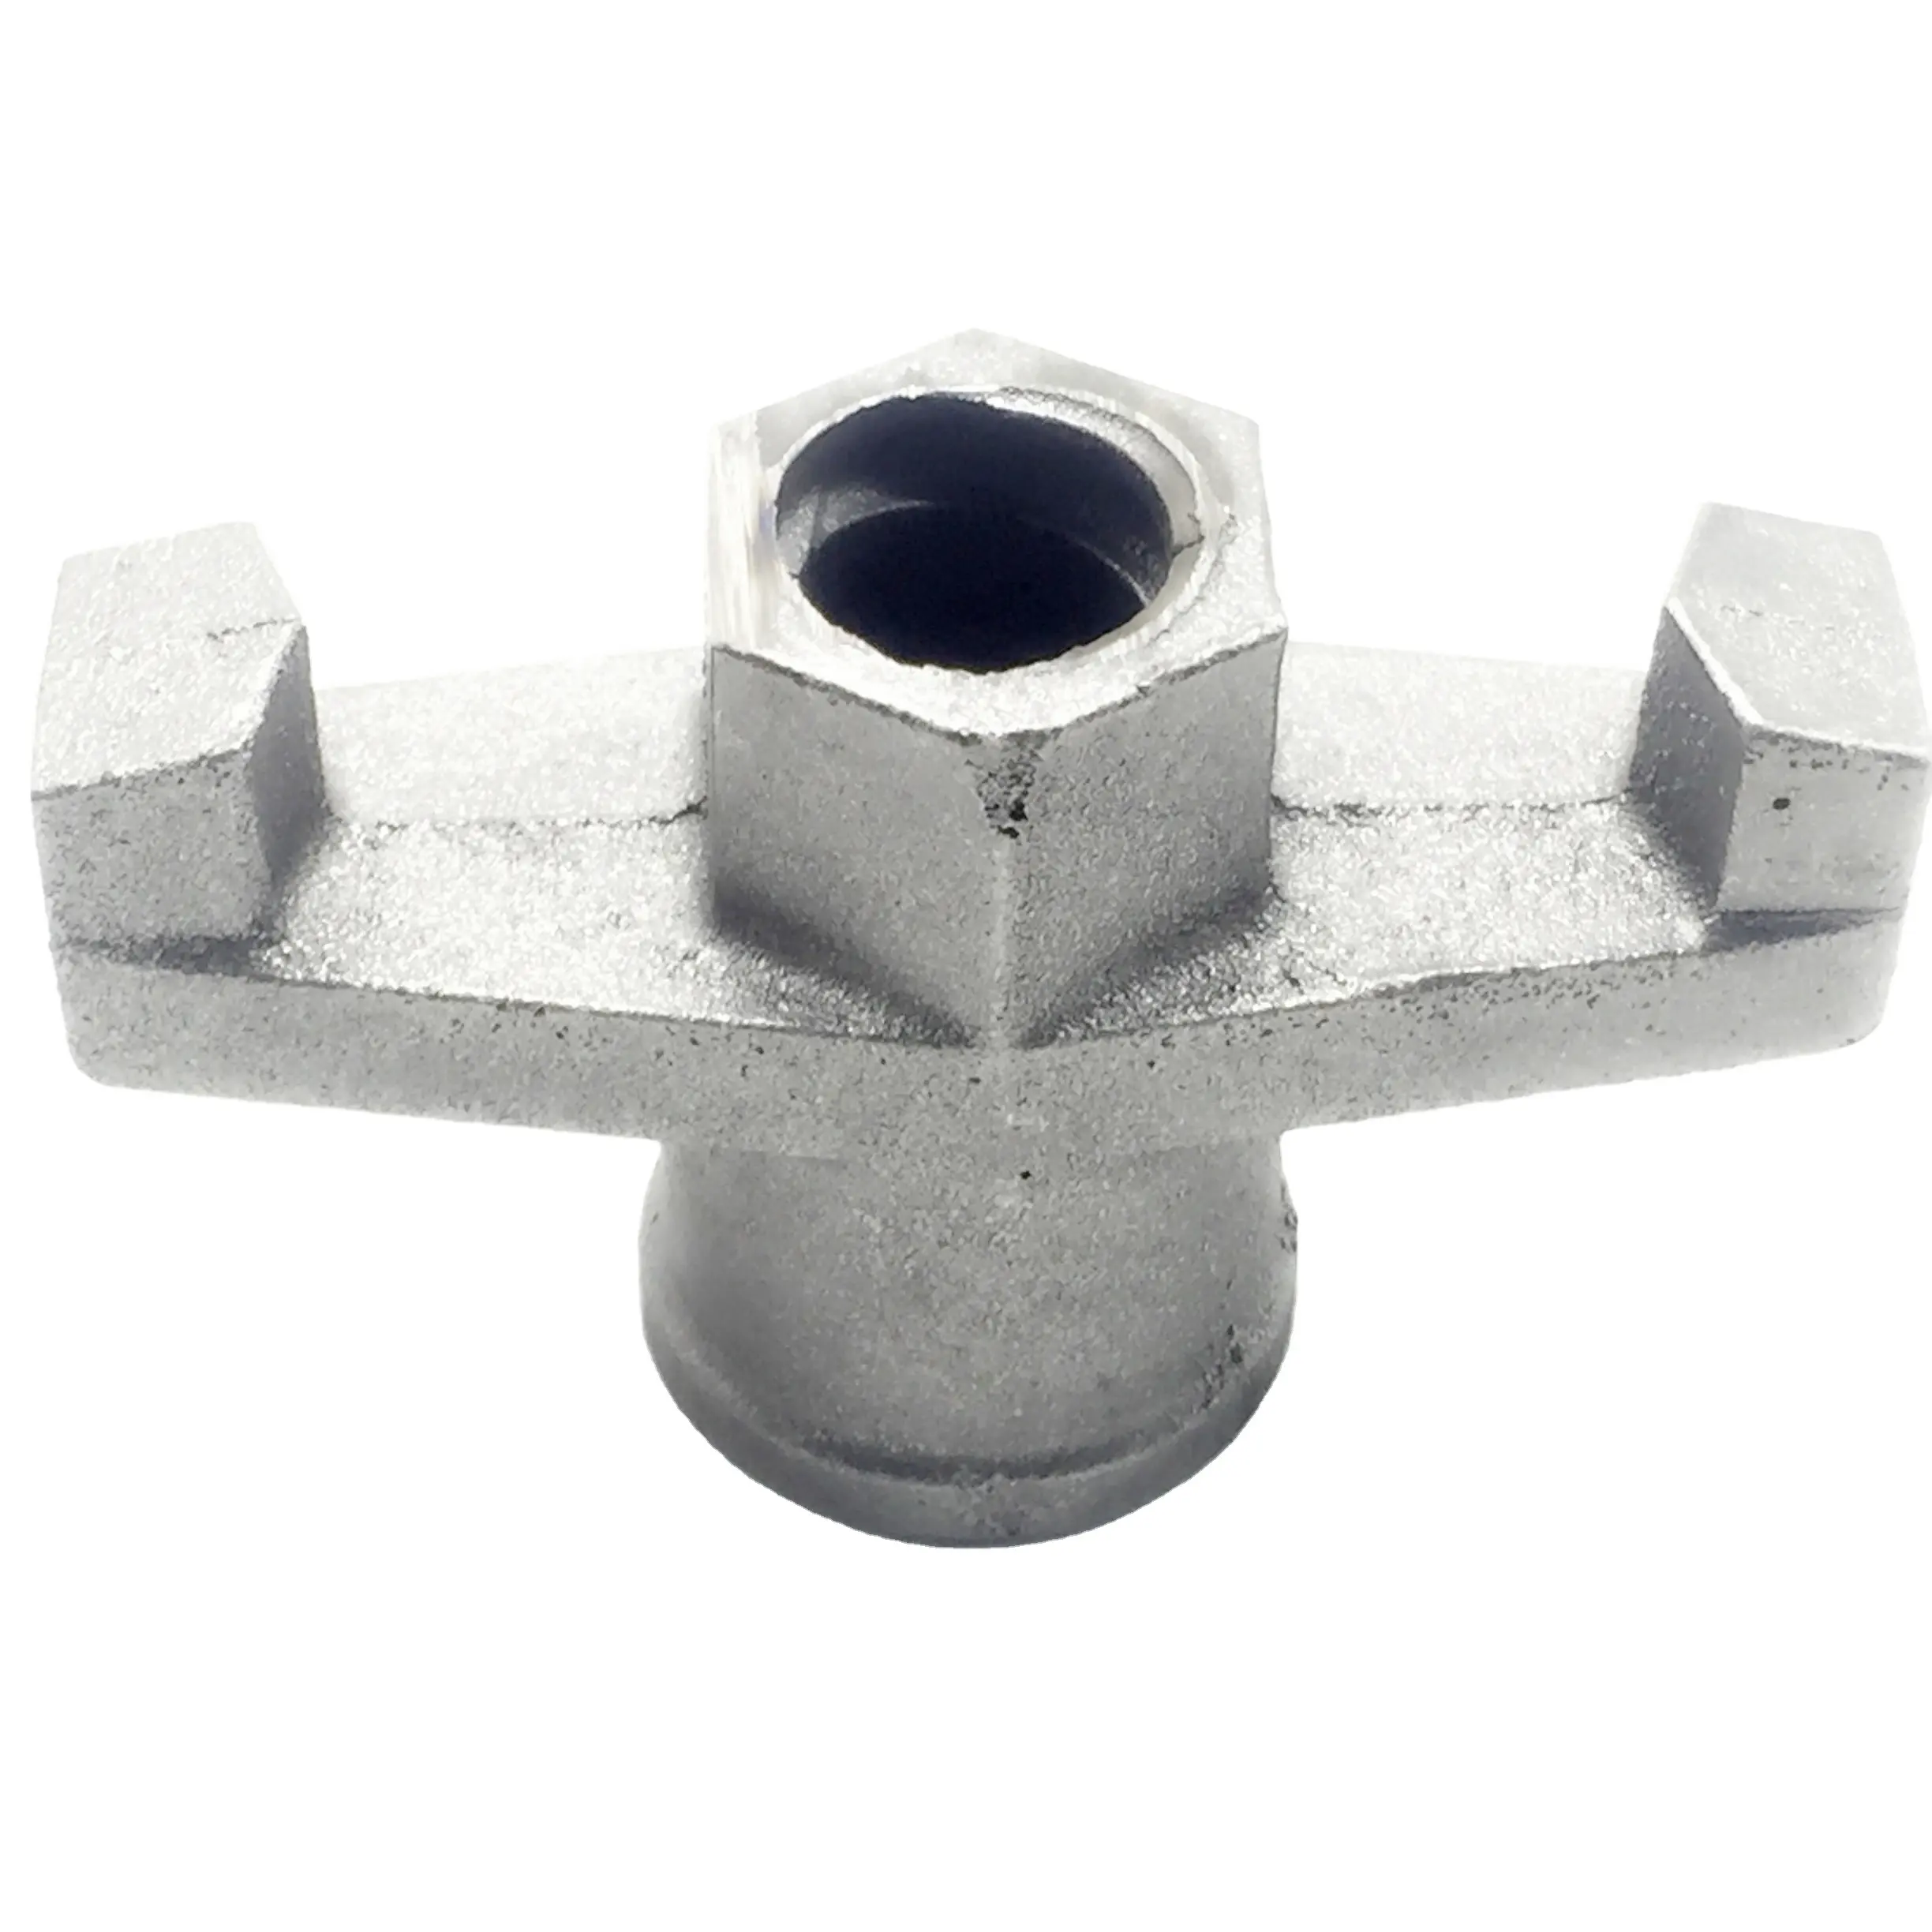 Formwork Accessories Cast Iron Anchor Nut All Threaded Tie Rod with Wing Nuts 16mm for building